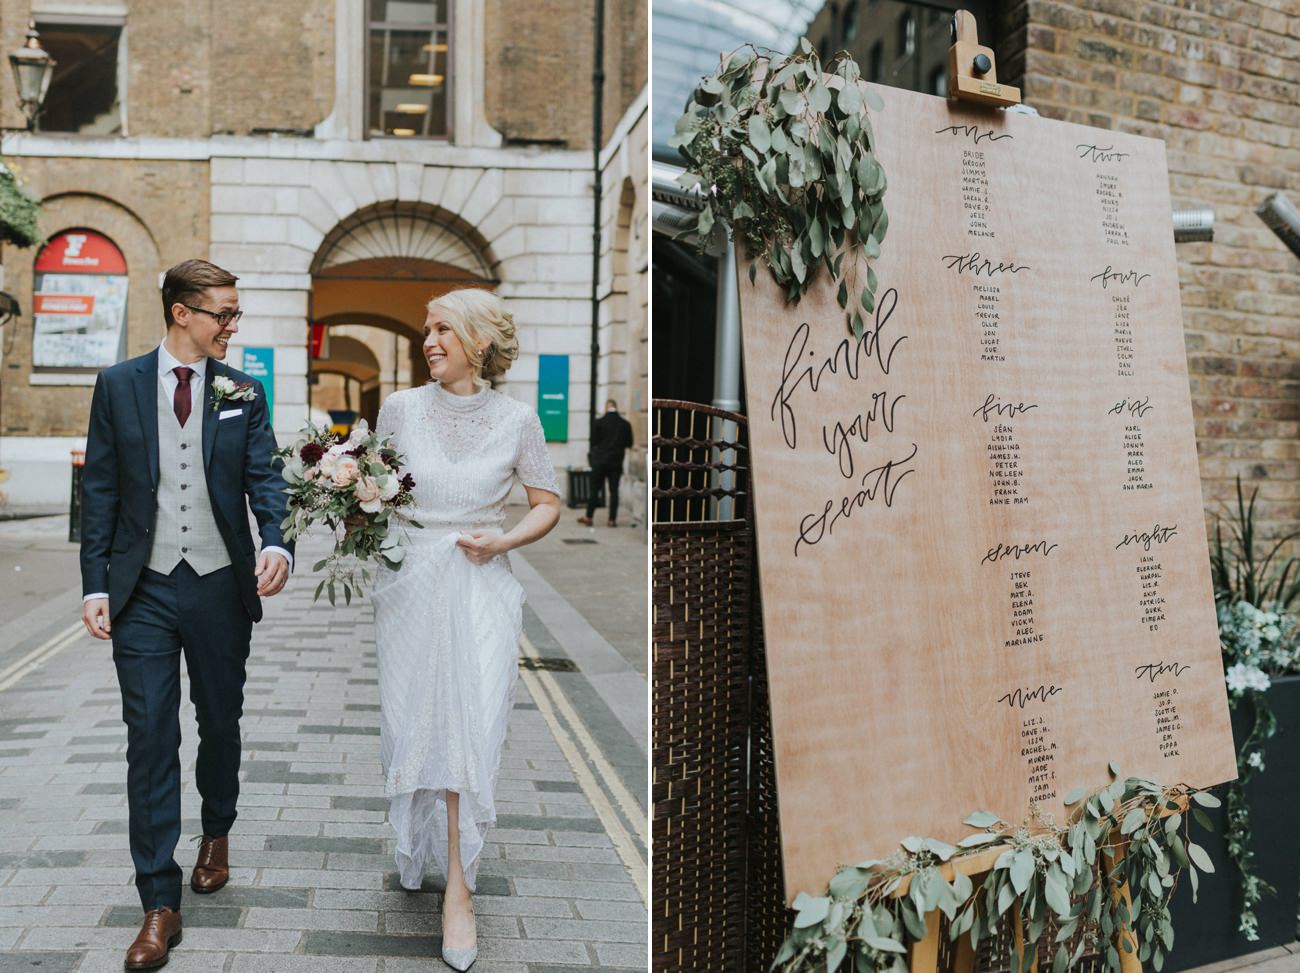 Bride and groom walking in London streets.
Sitting plan for guests at a wedding.